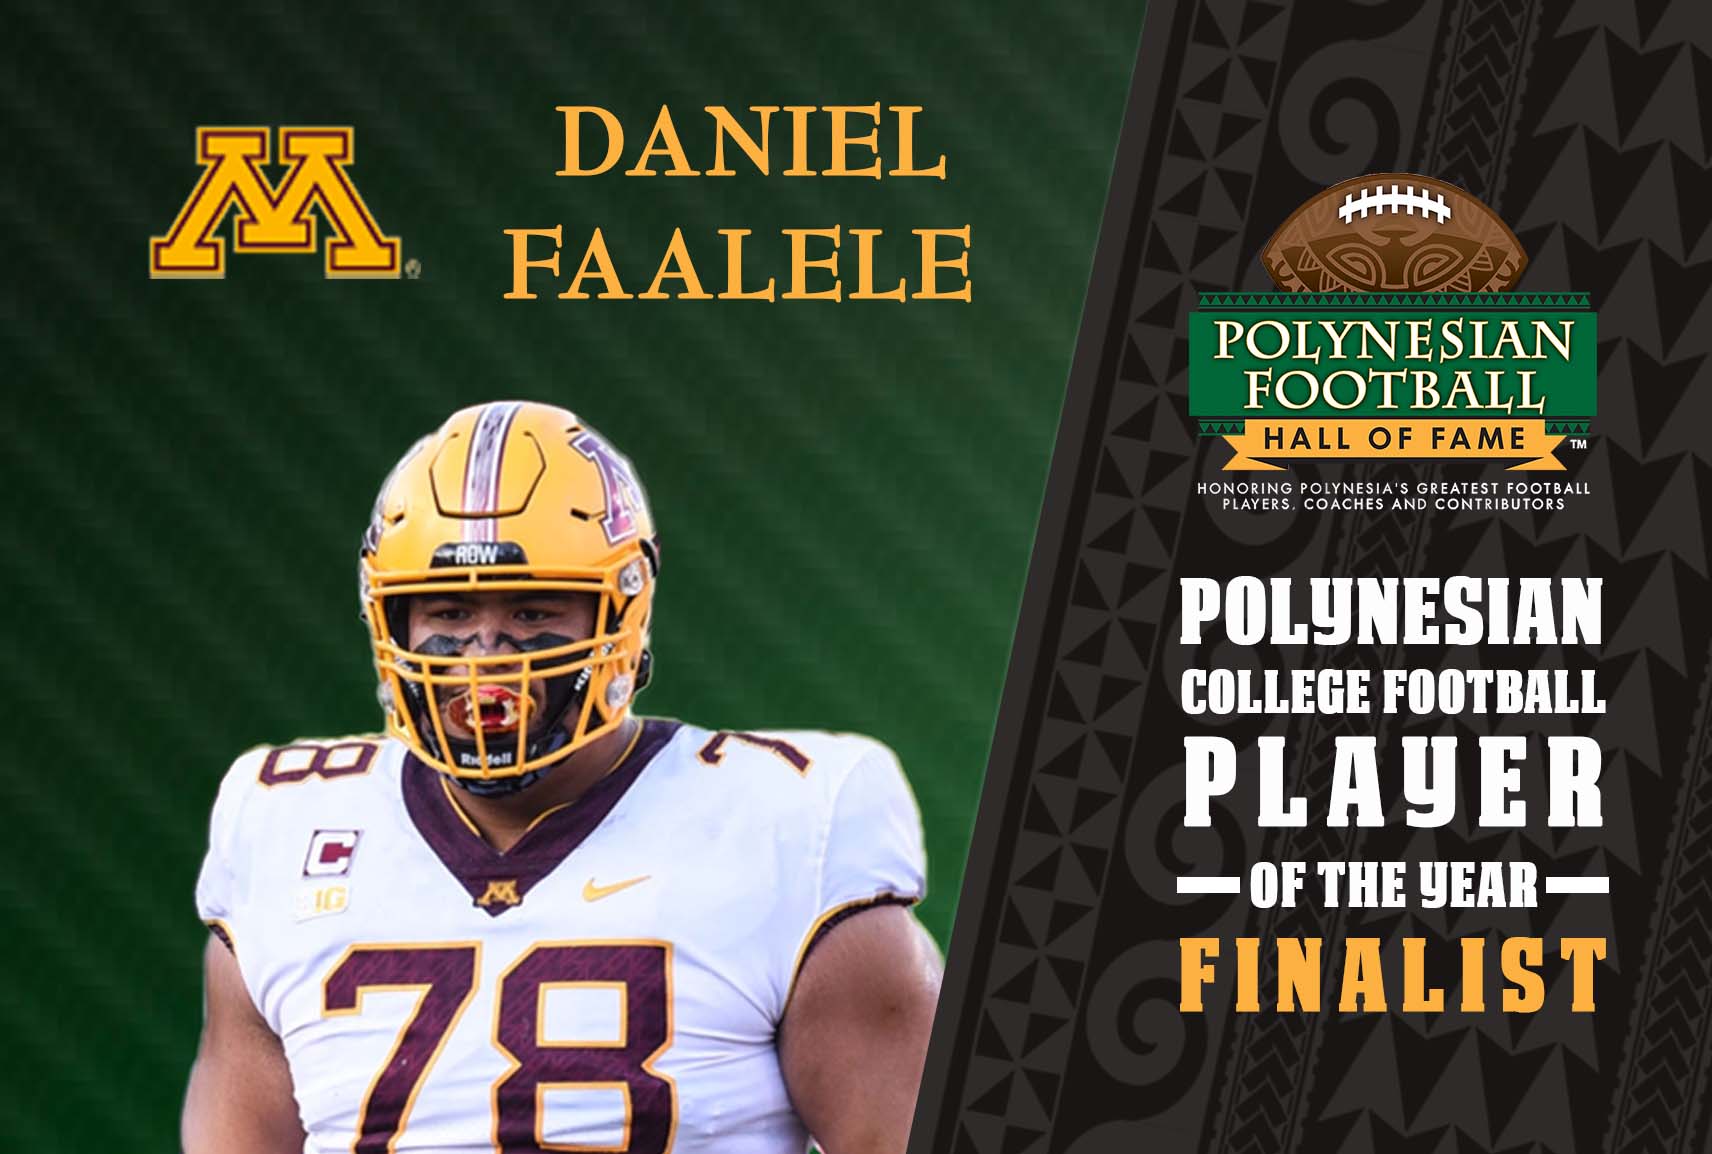 Polynesian Football on X: 'Congratulations to @GopherFootball OL DANIEL  FAALELE on being named a Finalist for the 2021 Polynesian College Football  Player of the Year Award! 